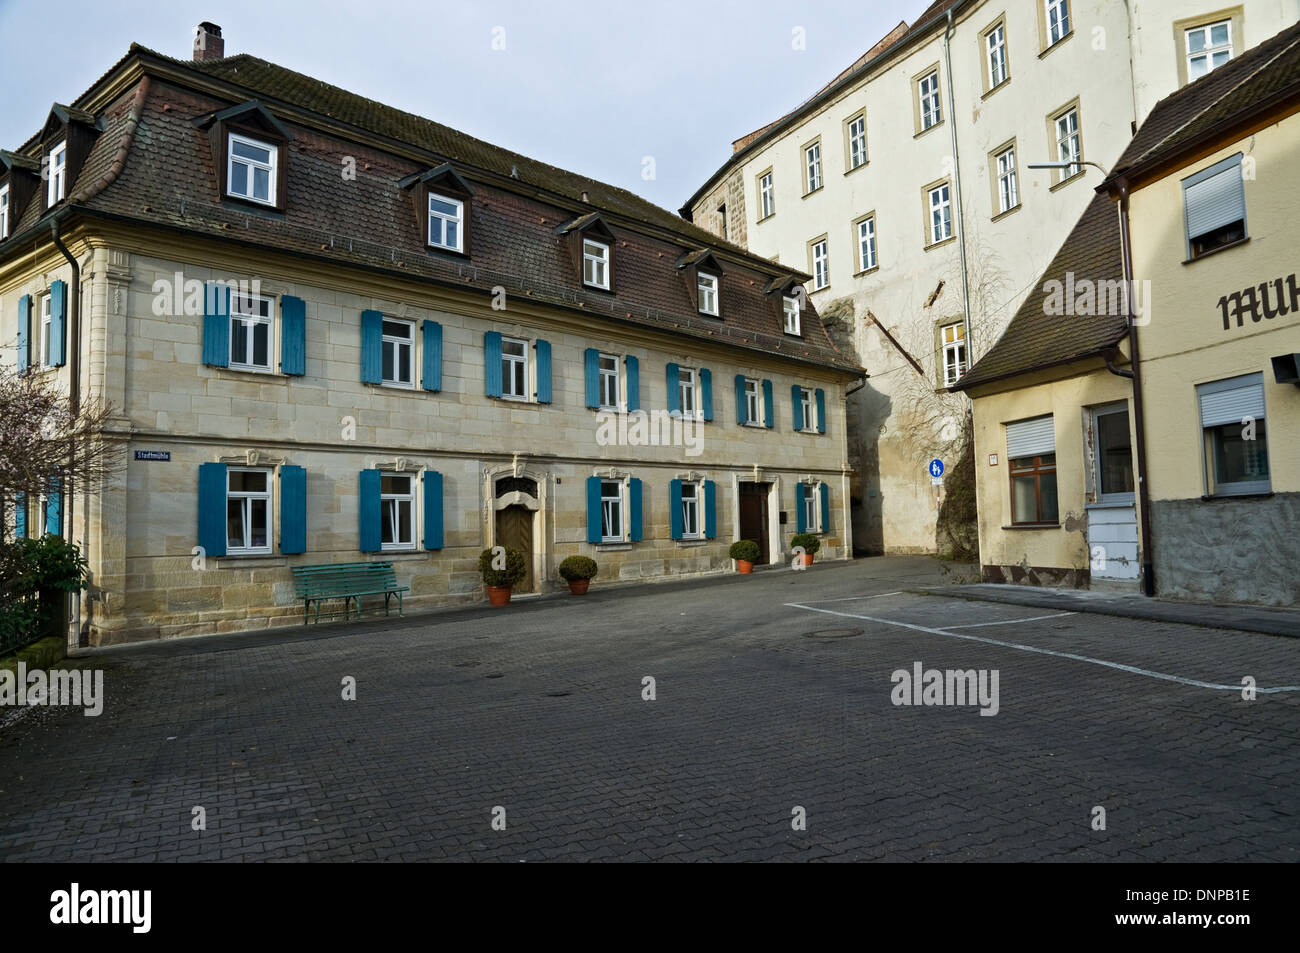 Stadtmühle (Town mill) from 1775 in Höchstadt, Germany Stock Photo